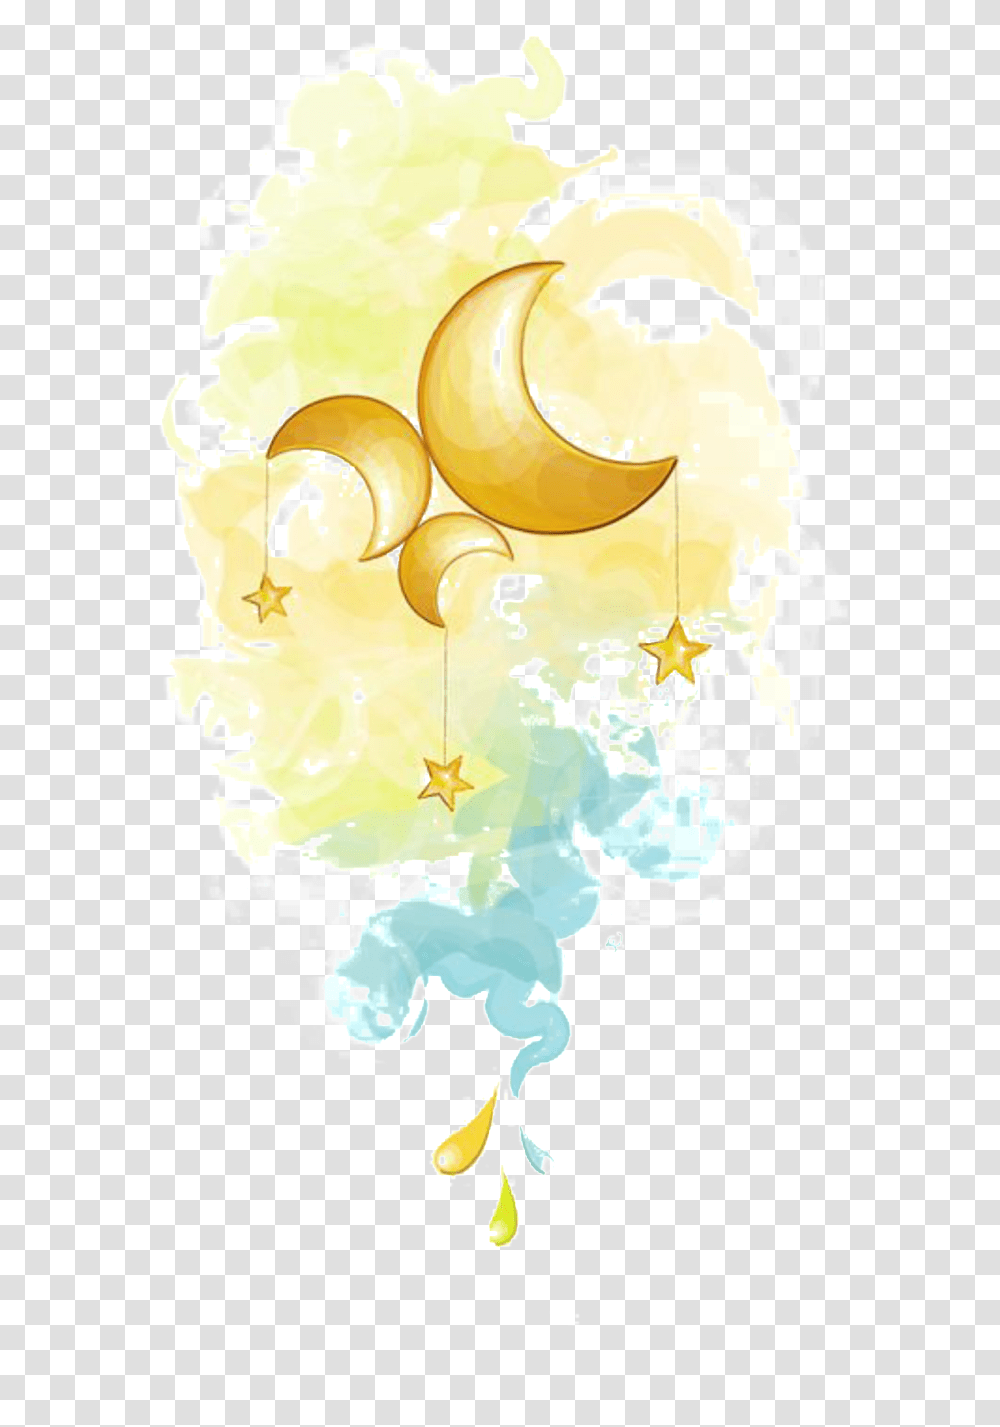 Painted Fairy Moon And Star Pattern Elements Stars And Illustration, Graphics, Art, Plant, Floral Design Transparent Png